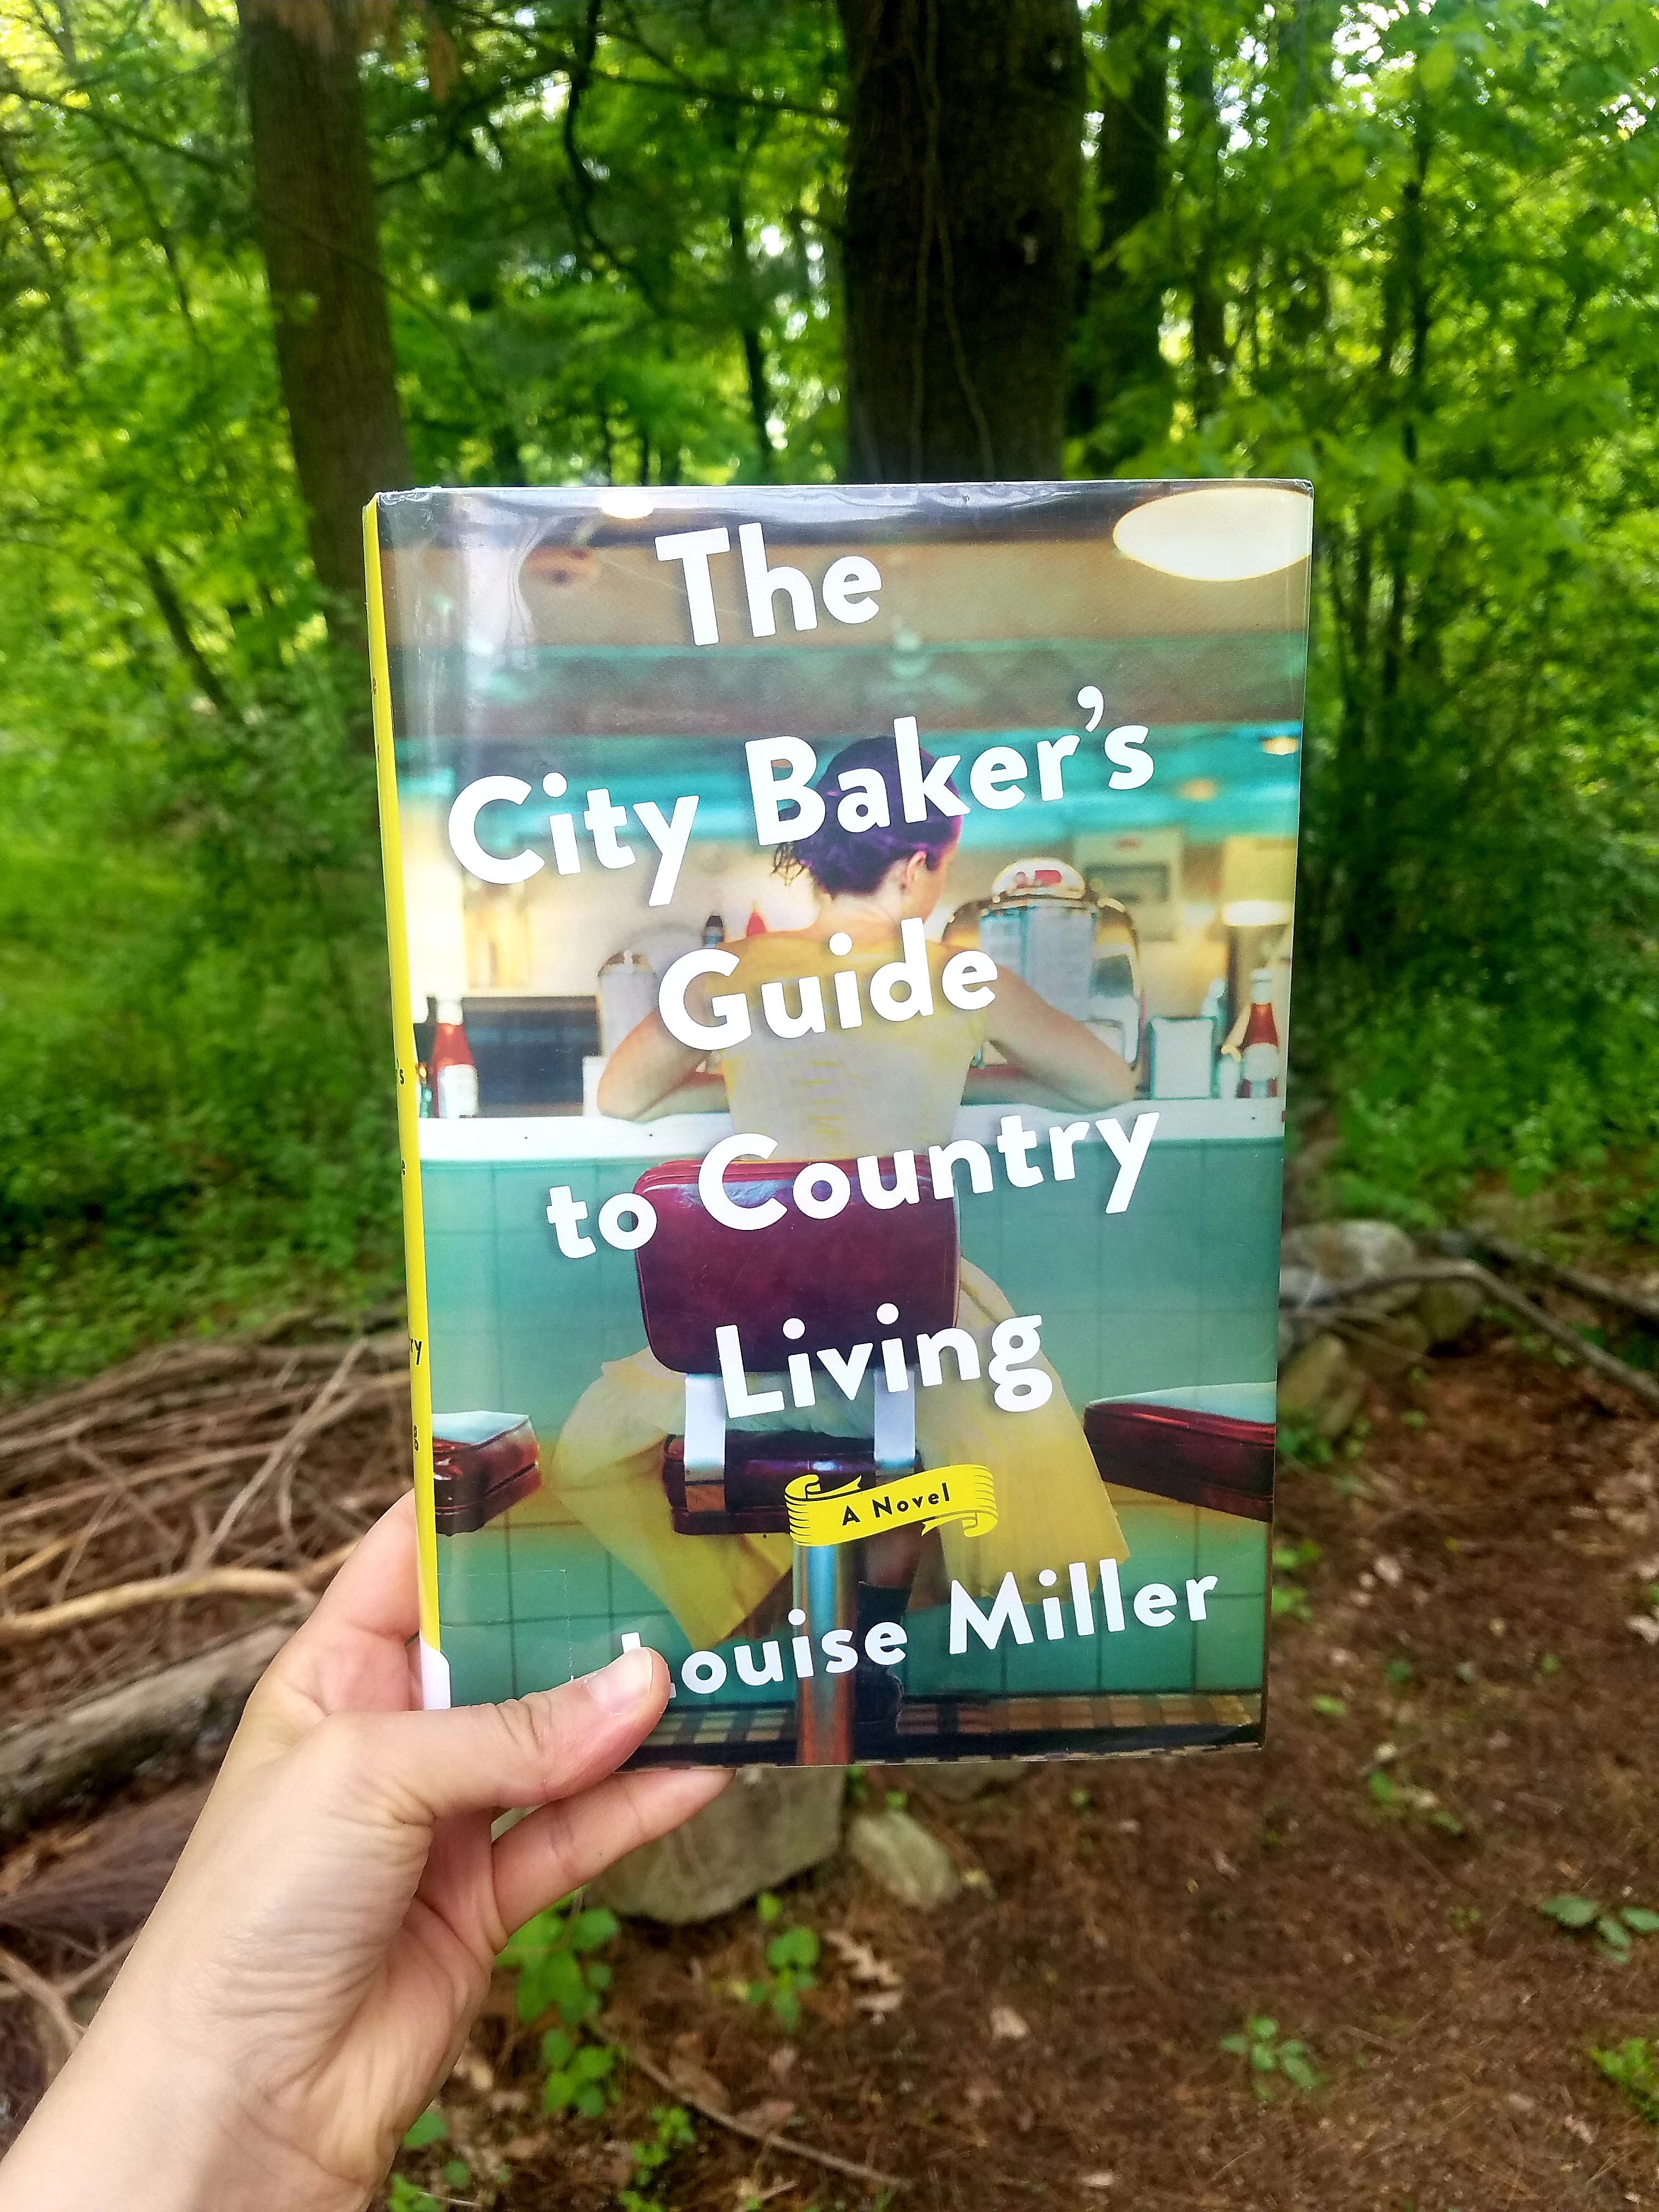 The City Baker's Guide to Country Living by Louise Miller – Book